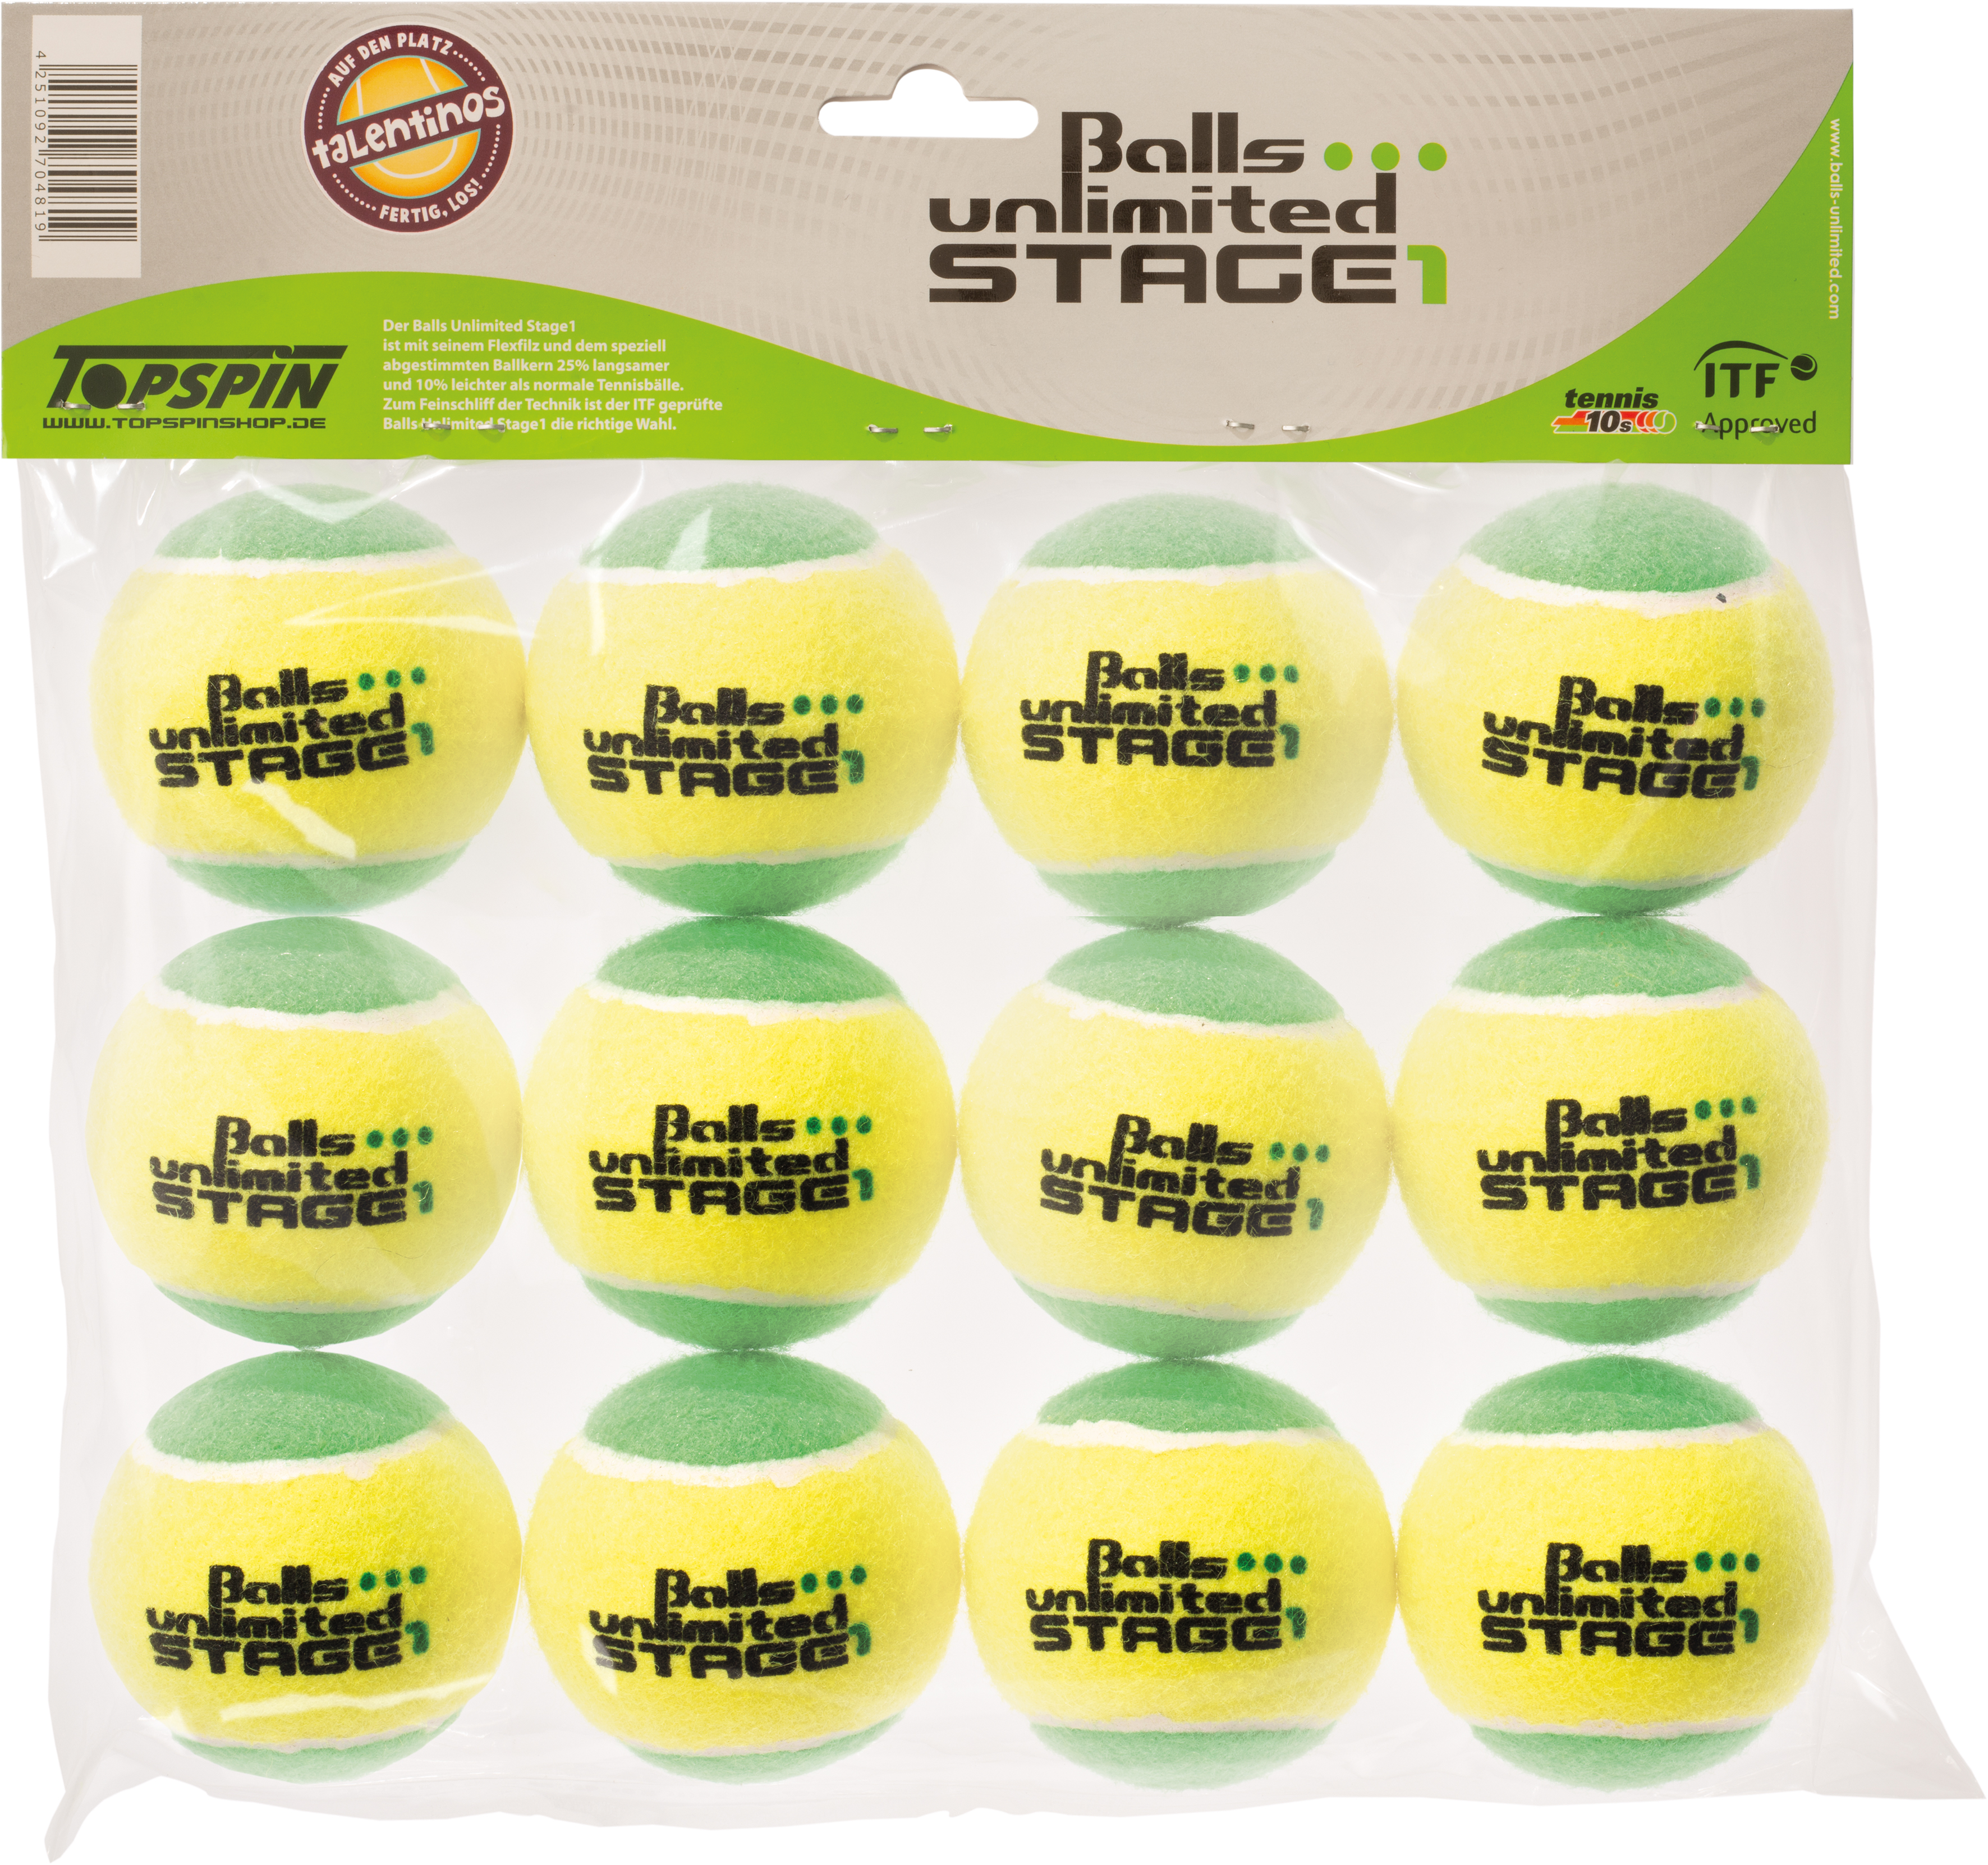 Tennisball Balls Unlimited Stage 1 - pack of 12